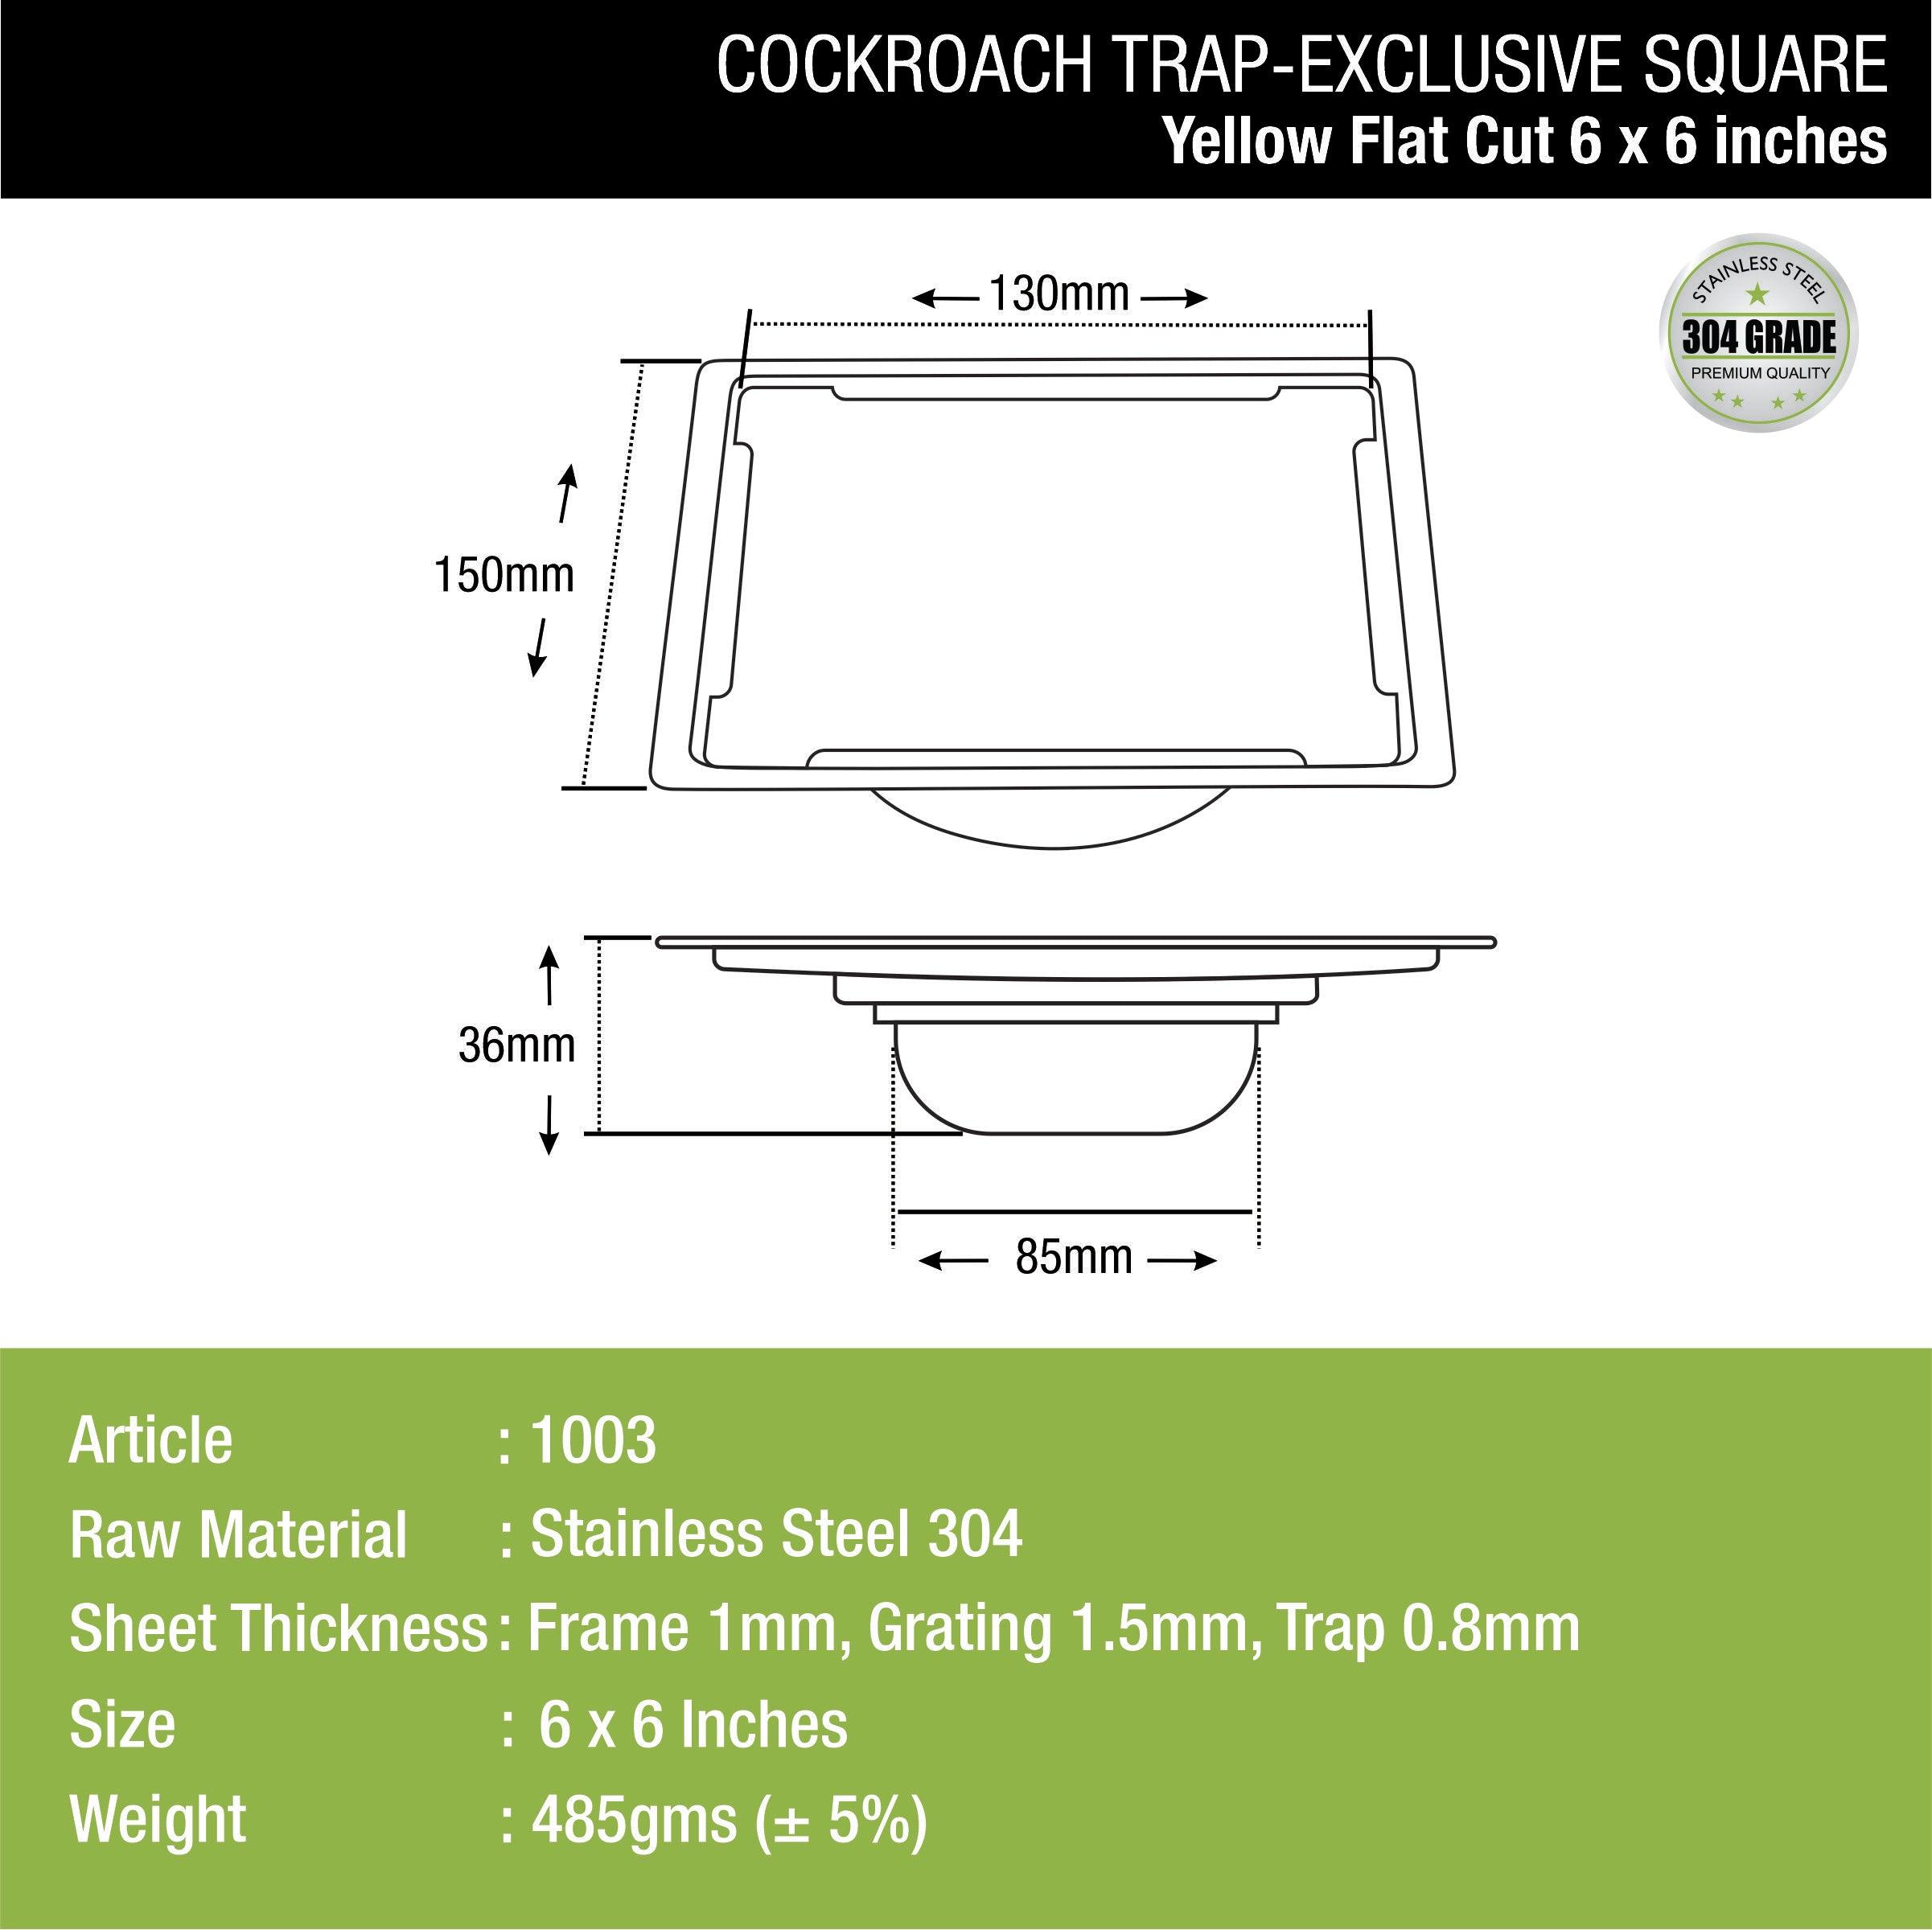 Yellow Exclusive Square Flat Cut Floor Drain (6 x 6 Inches) with Cockroach Trap Yellow Exclusive Square Flat Cut Floor Drain (6 x 6 Inches) with Cockroach Trap dimensions and sizes